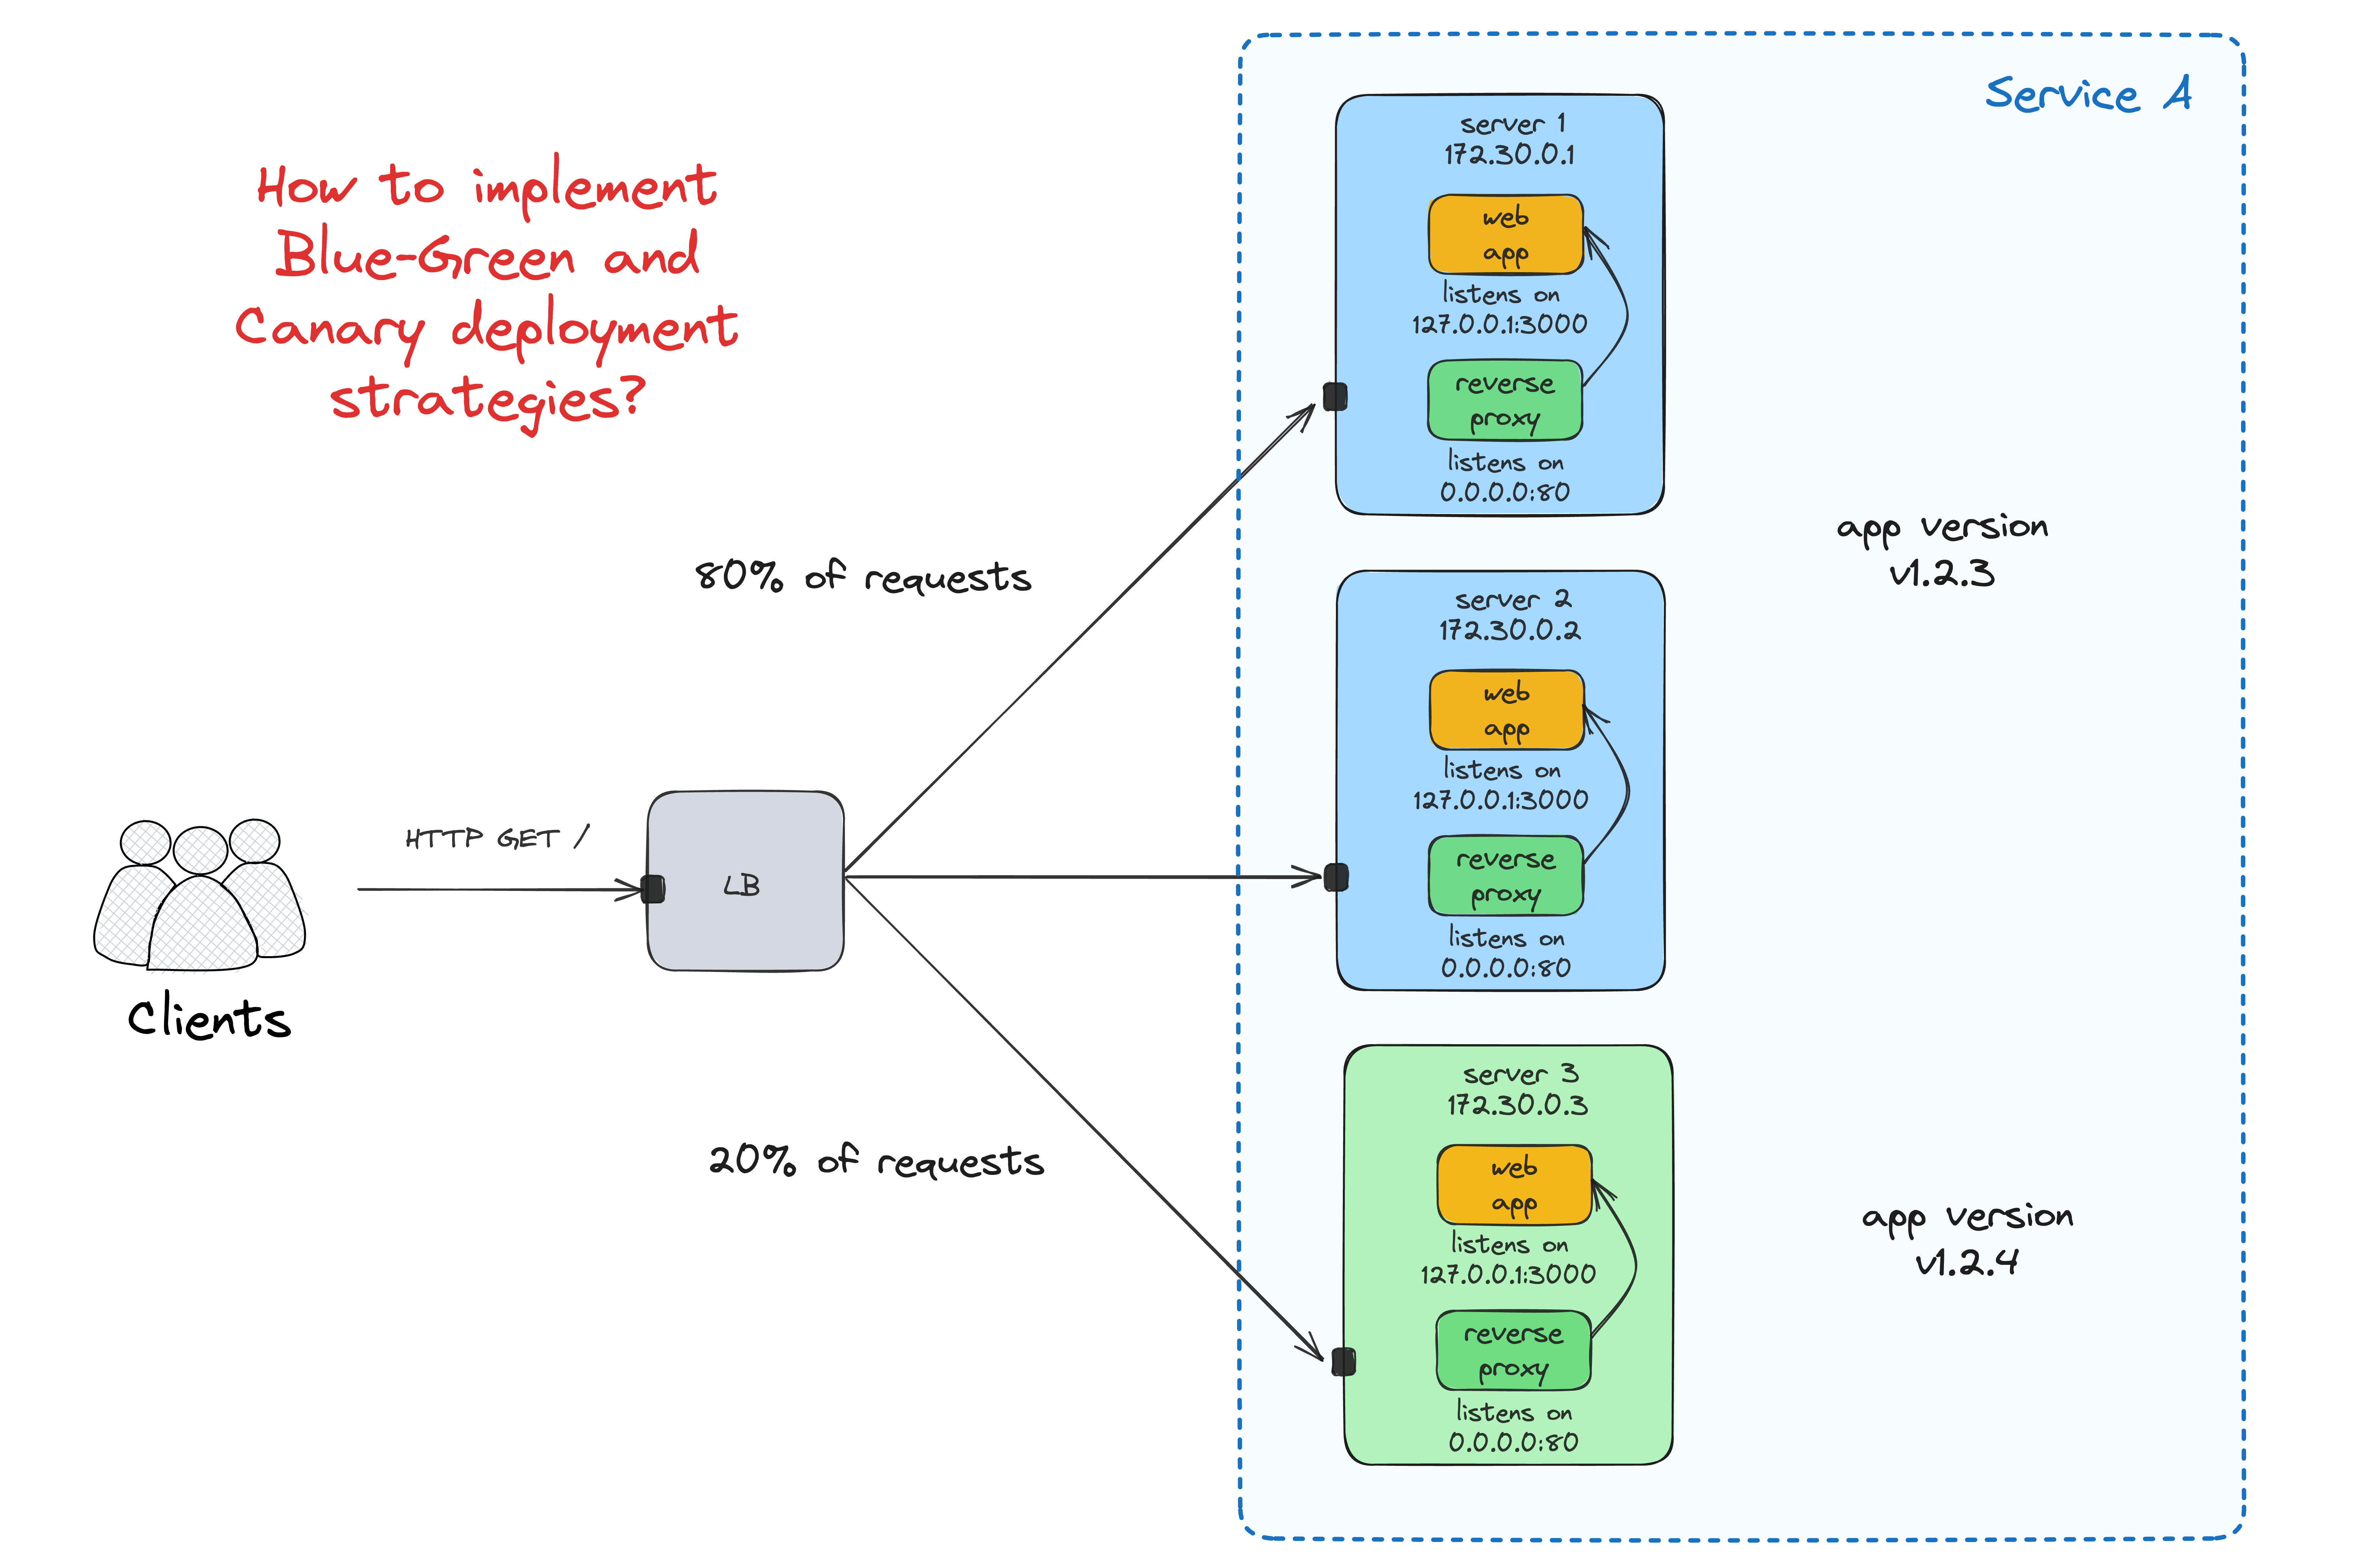 Blue-green and canary deployment strategies.